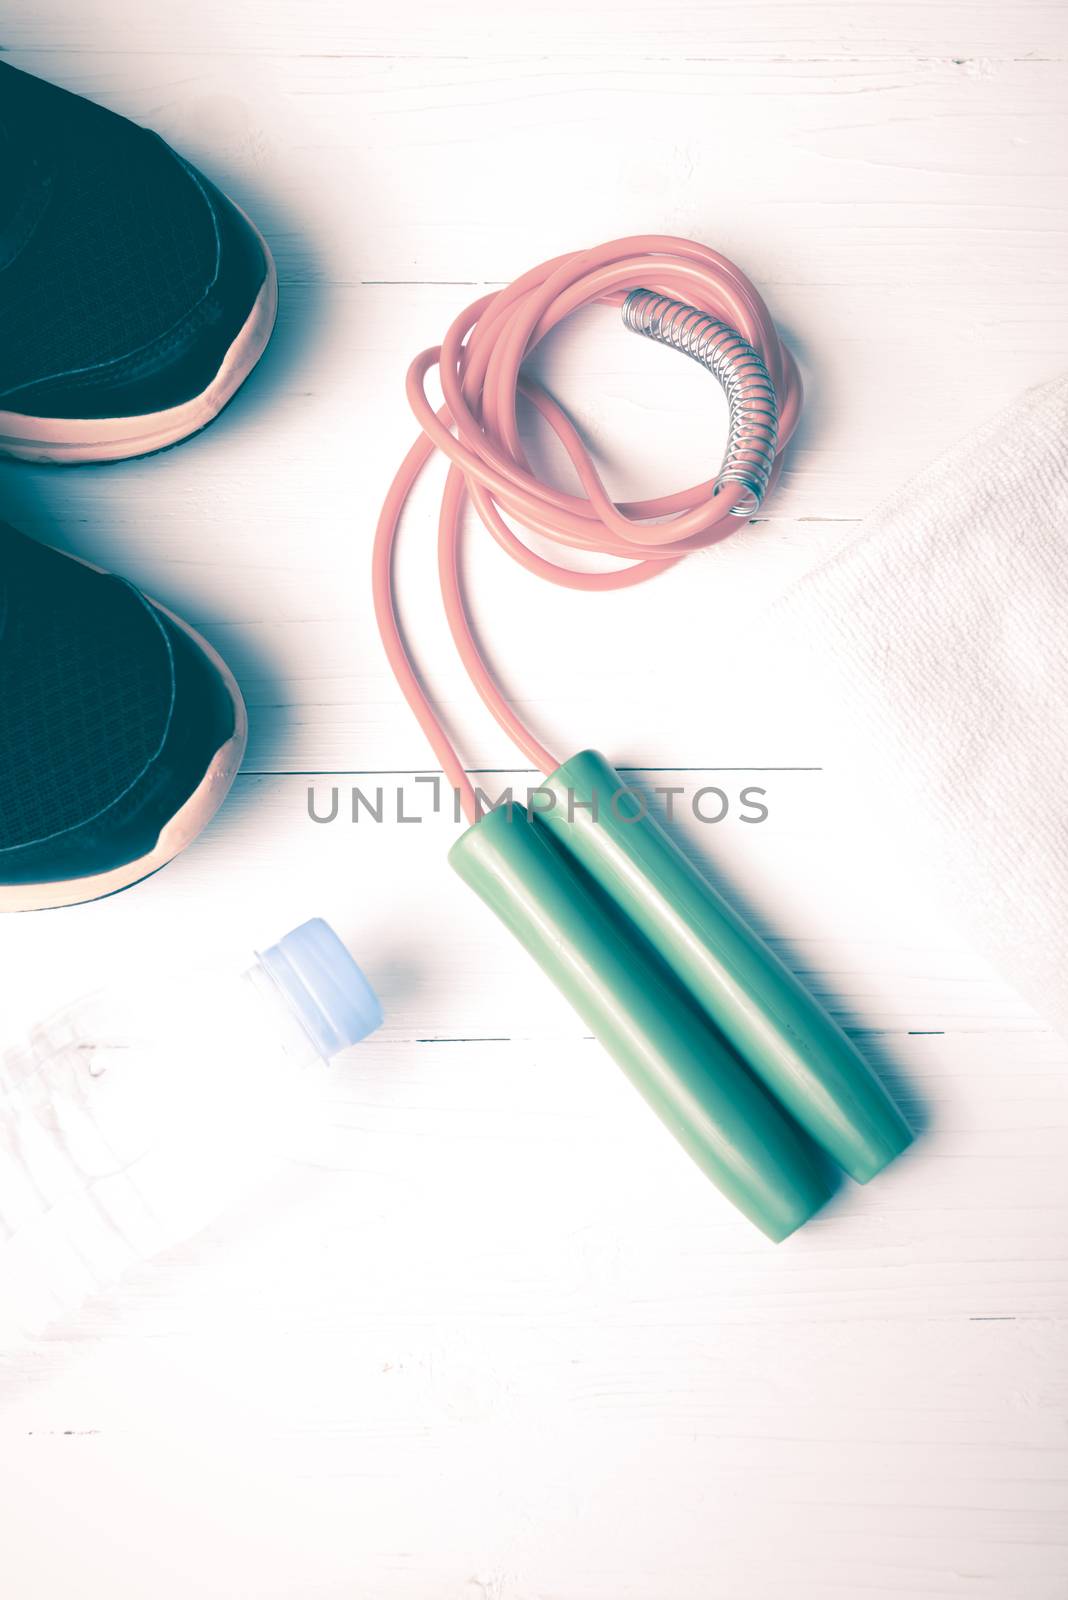 fitness equipment:running shoes,water bottle,towel,rope vintage style